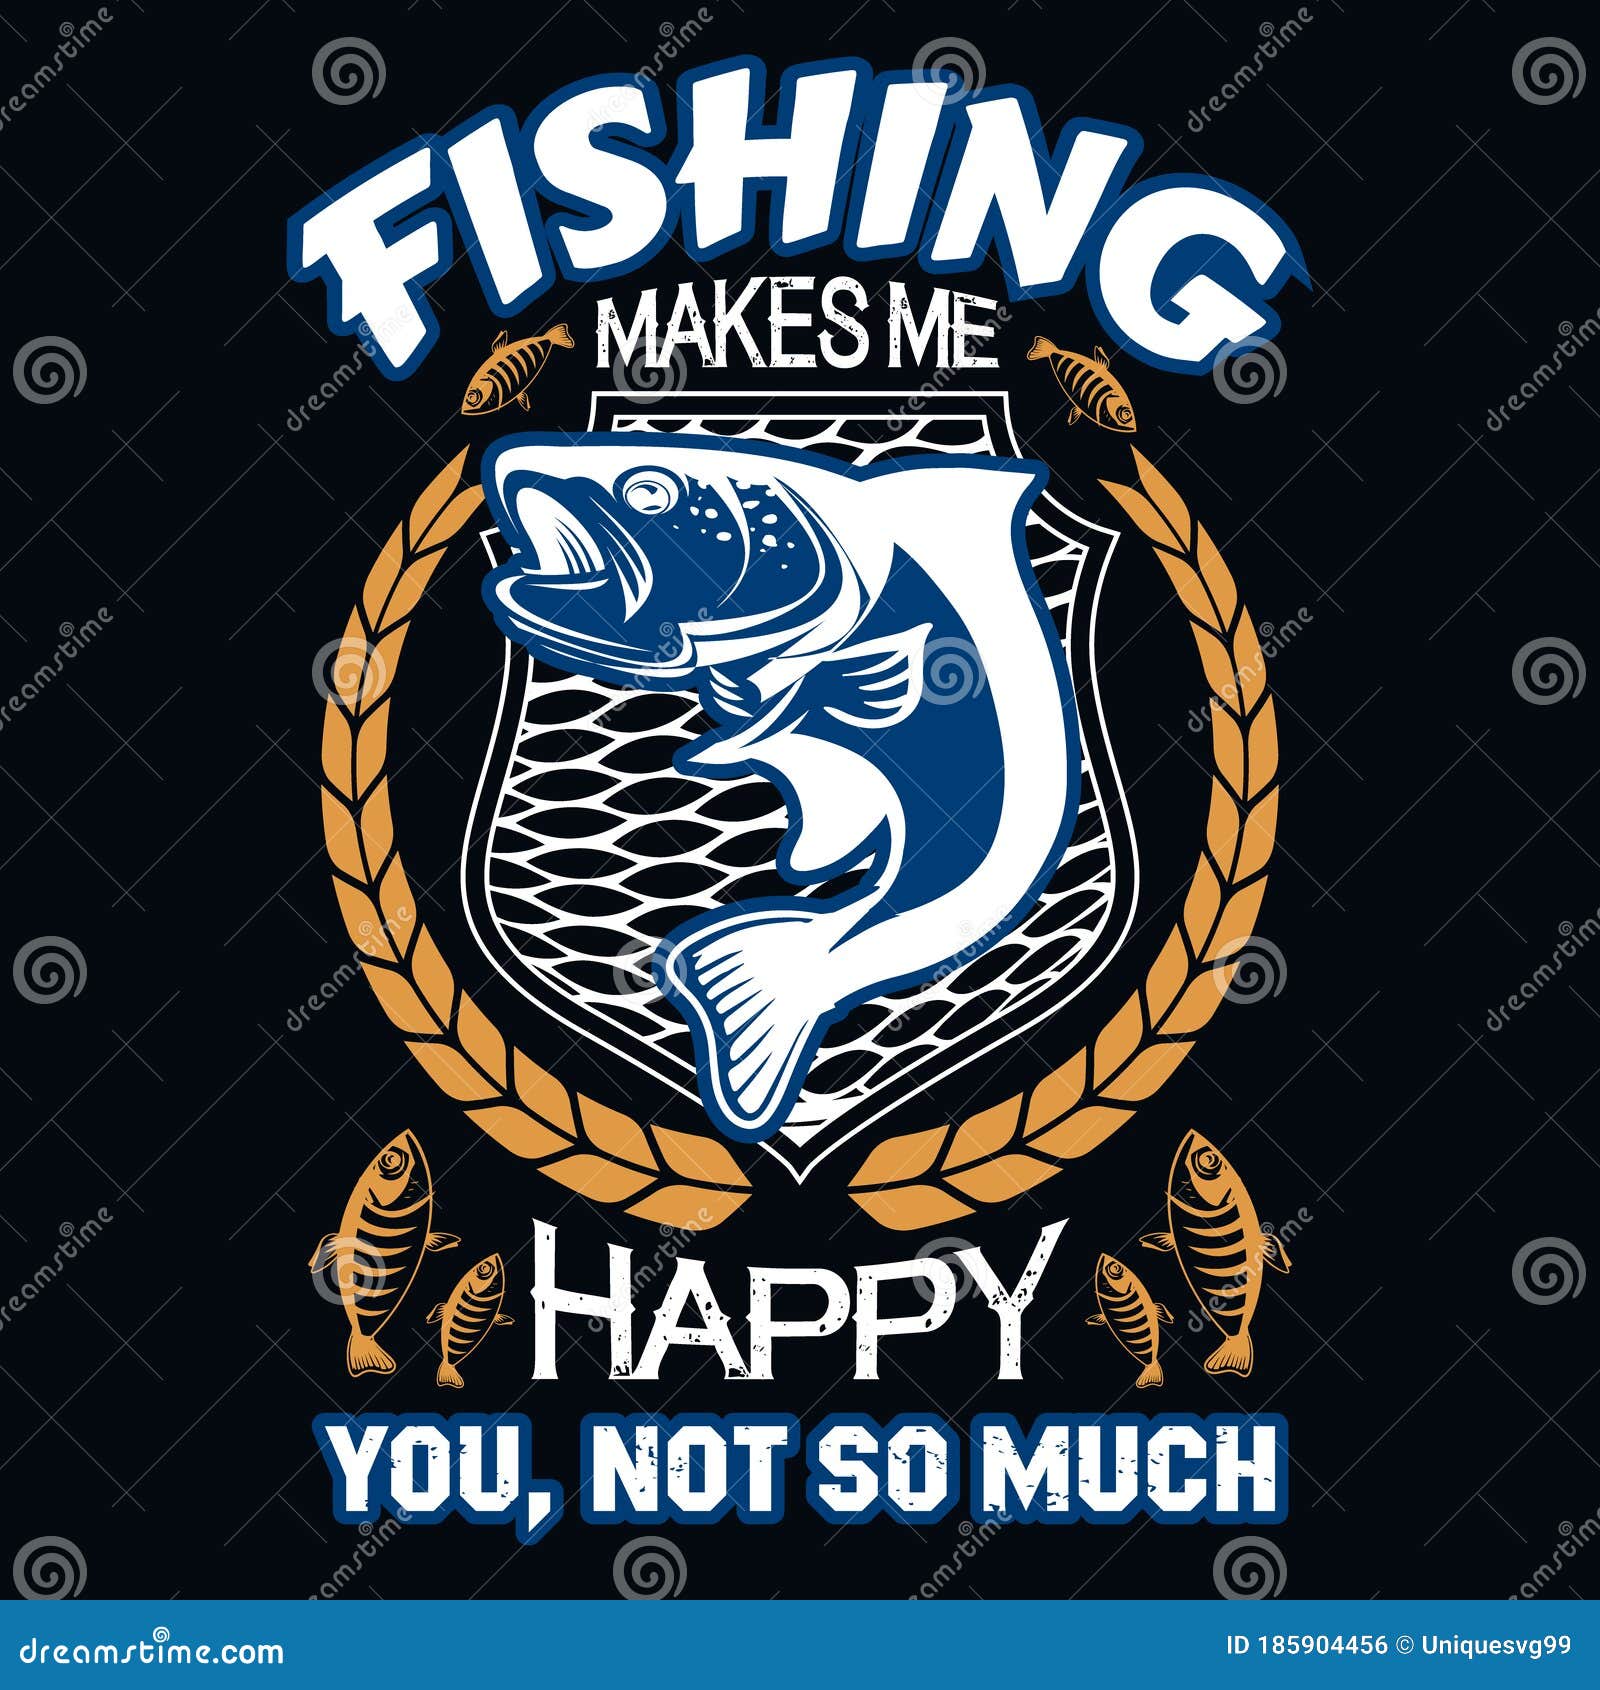 Fishing Makes Me Happy You No so Much - Fishing T Shirts Design,Vector  Graphic, Typographic Poster or T-shirt Stock Vector - Illustration of boat,  label: 185904456